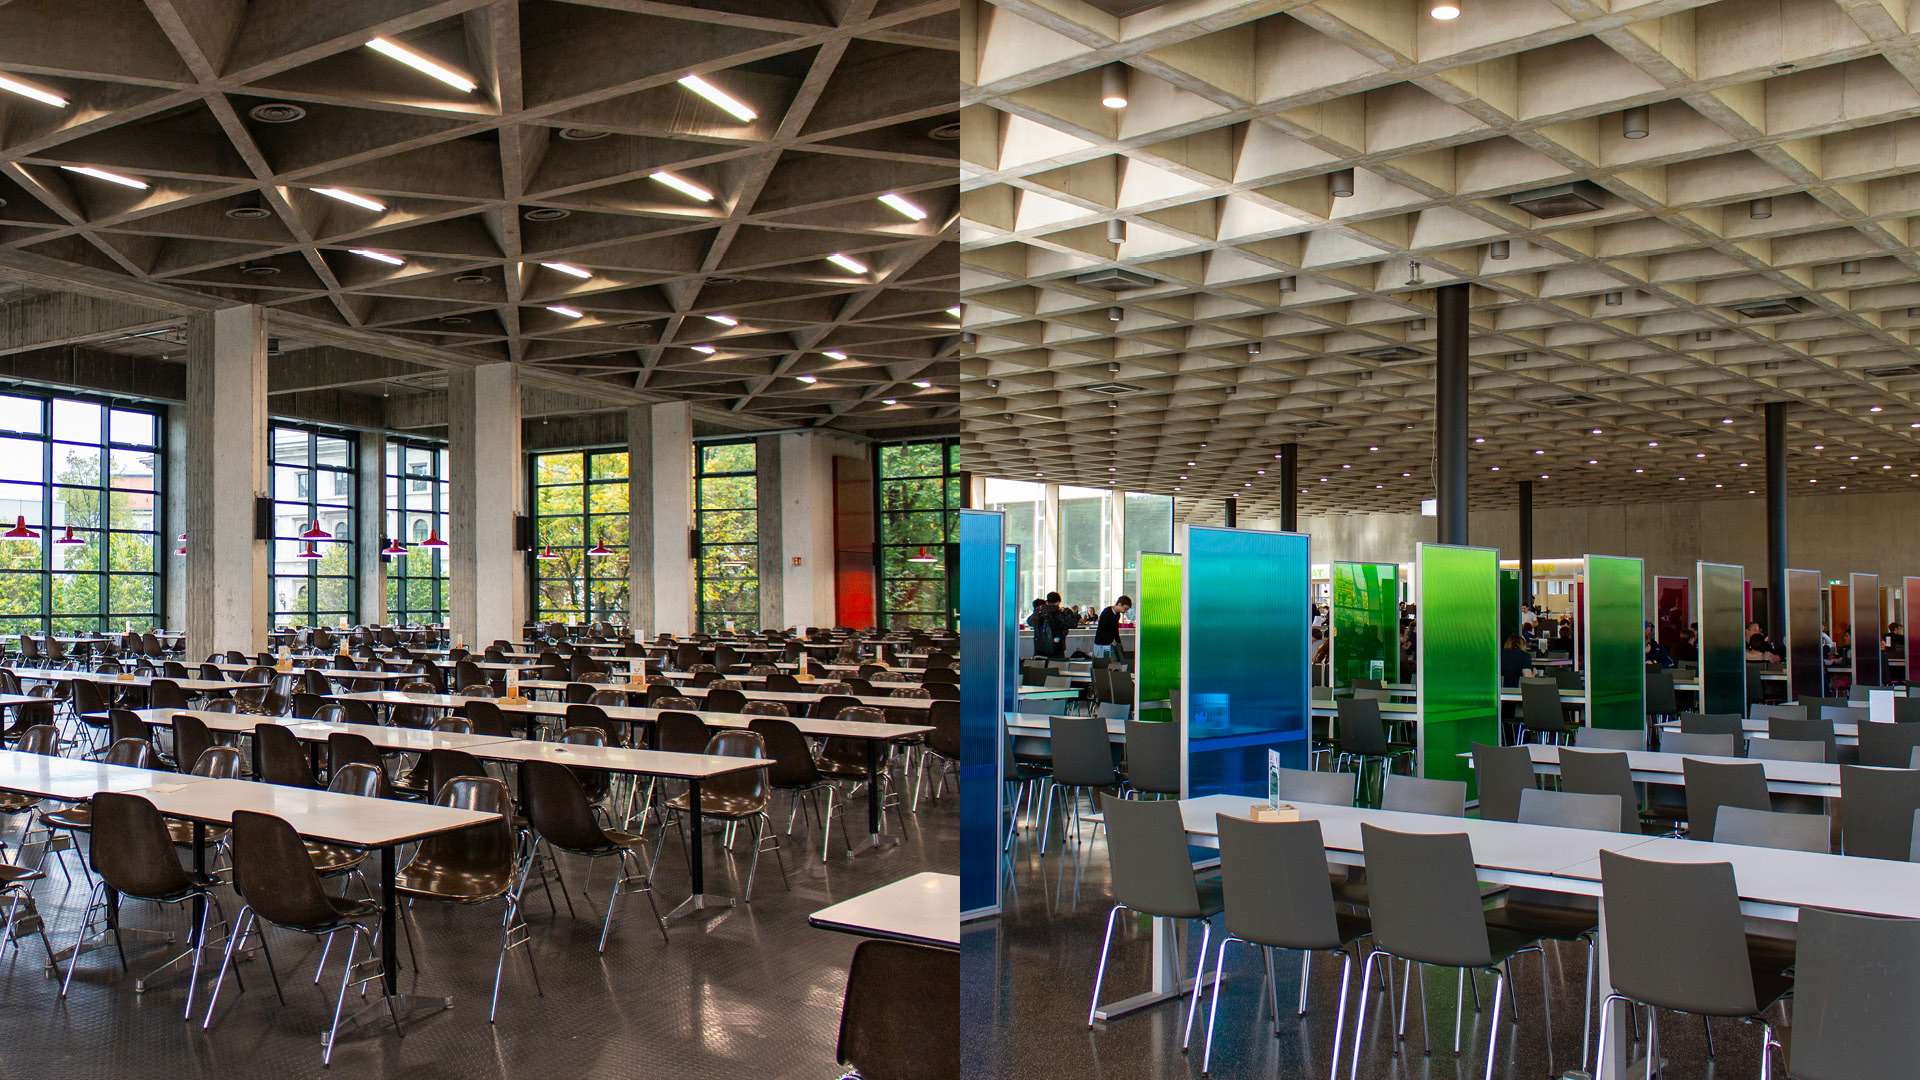 The study areas in the canteens in Munich (left) and Garching (right)